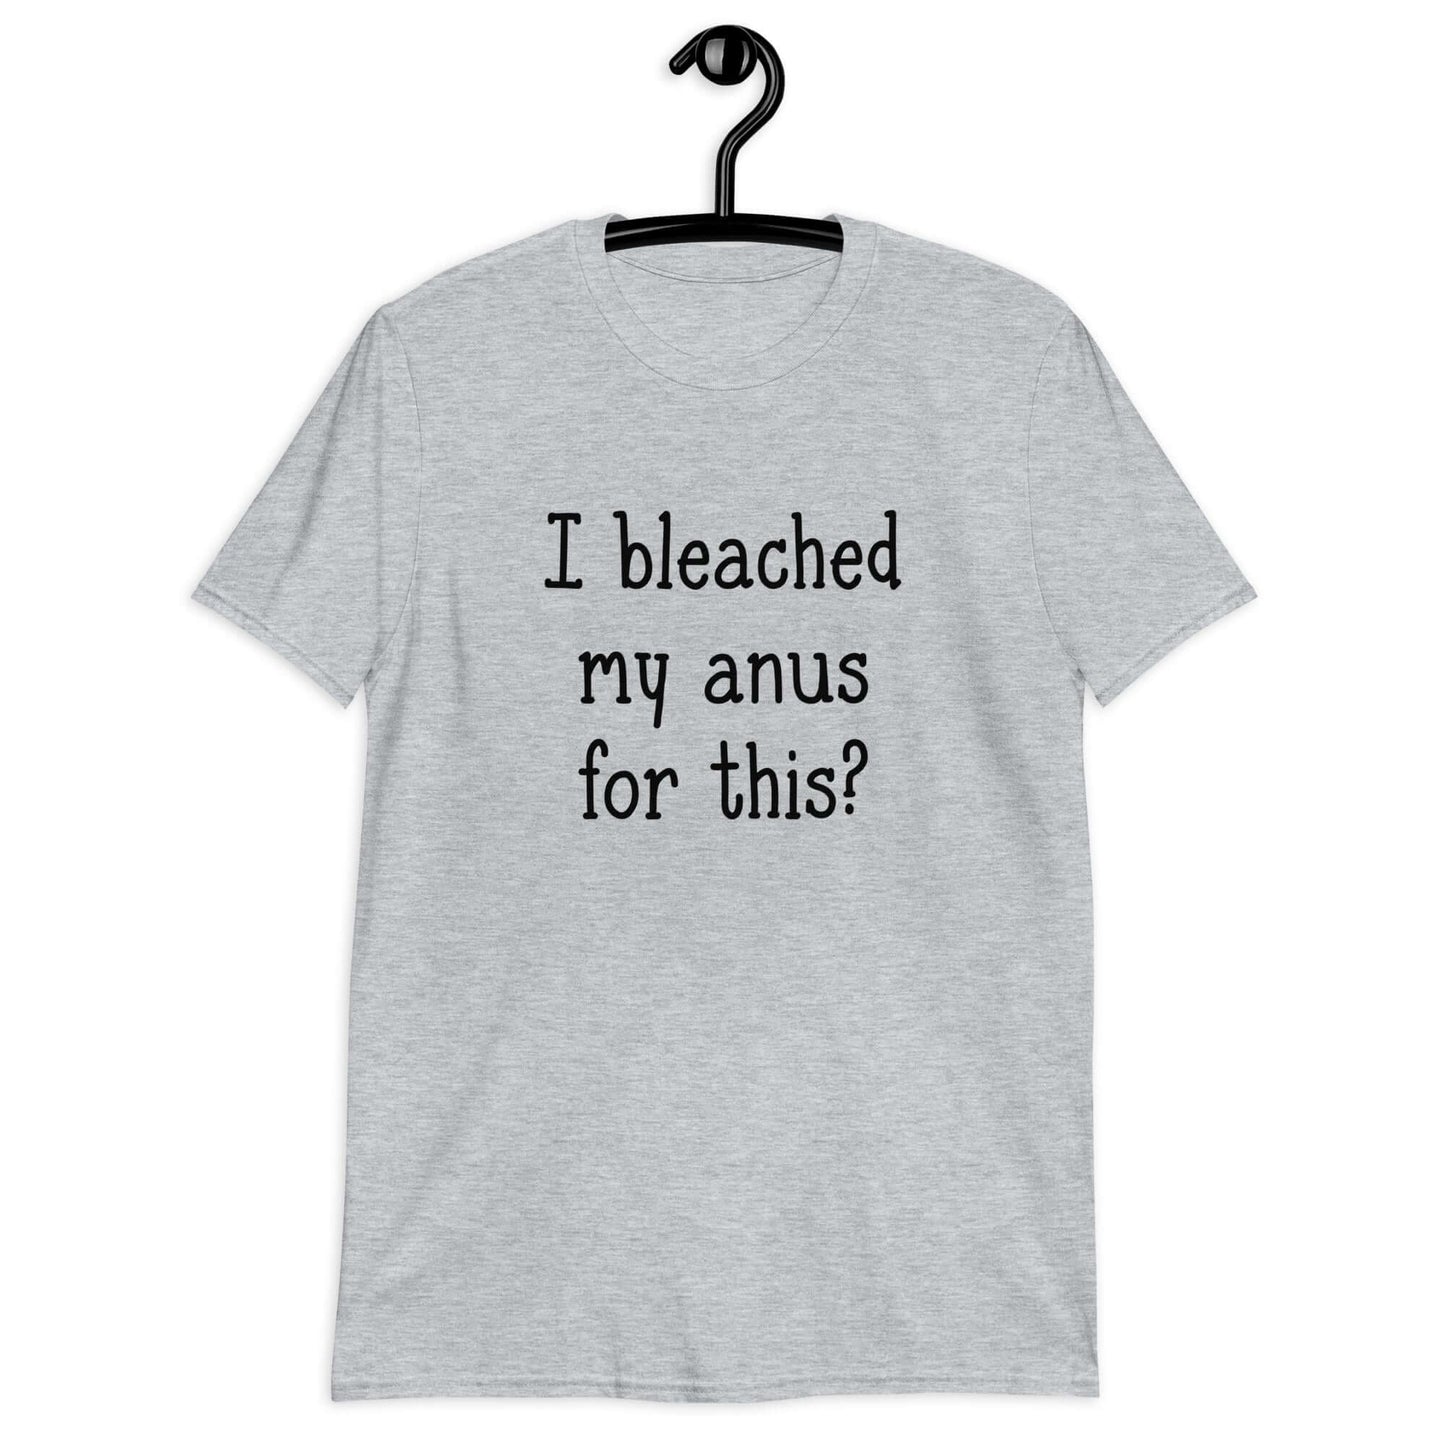 Anal bleaching graphic tee. Funny Short-Sleeve Unisex T-Shirt